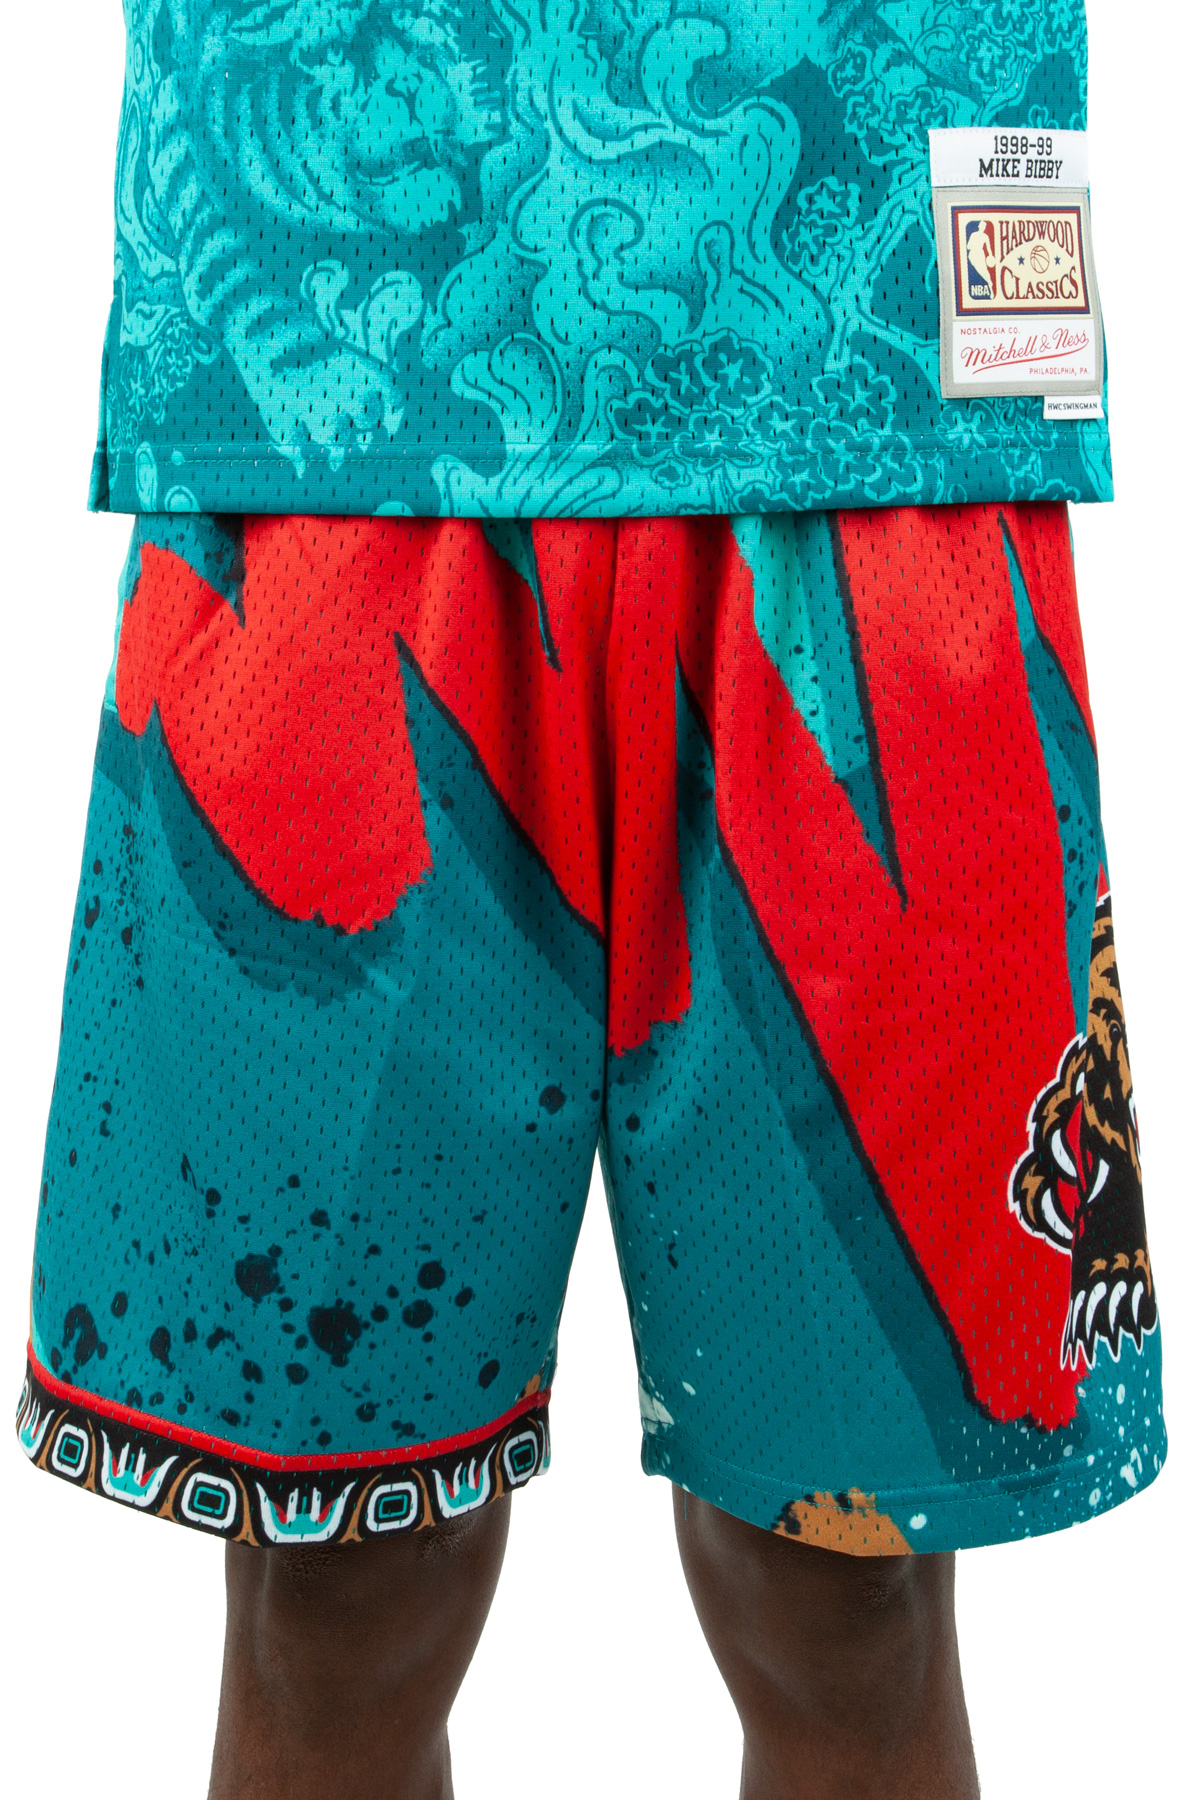 Youth Mitchell & Ness Teal Vancouver Grizzlies Hardwood Classics Swingman Shorts